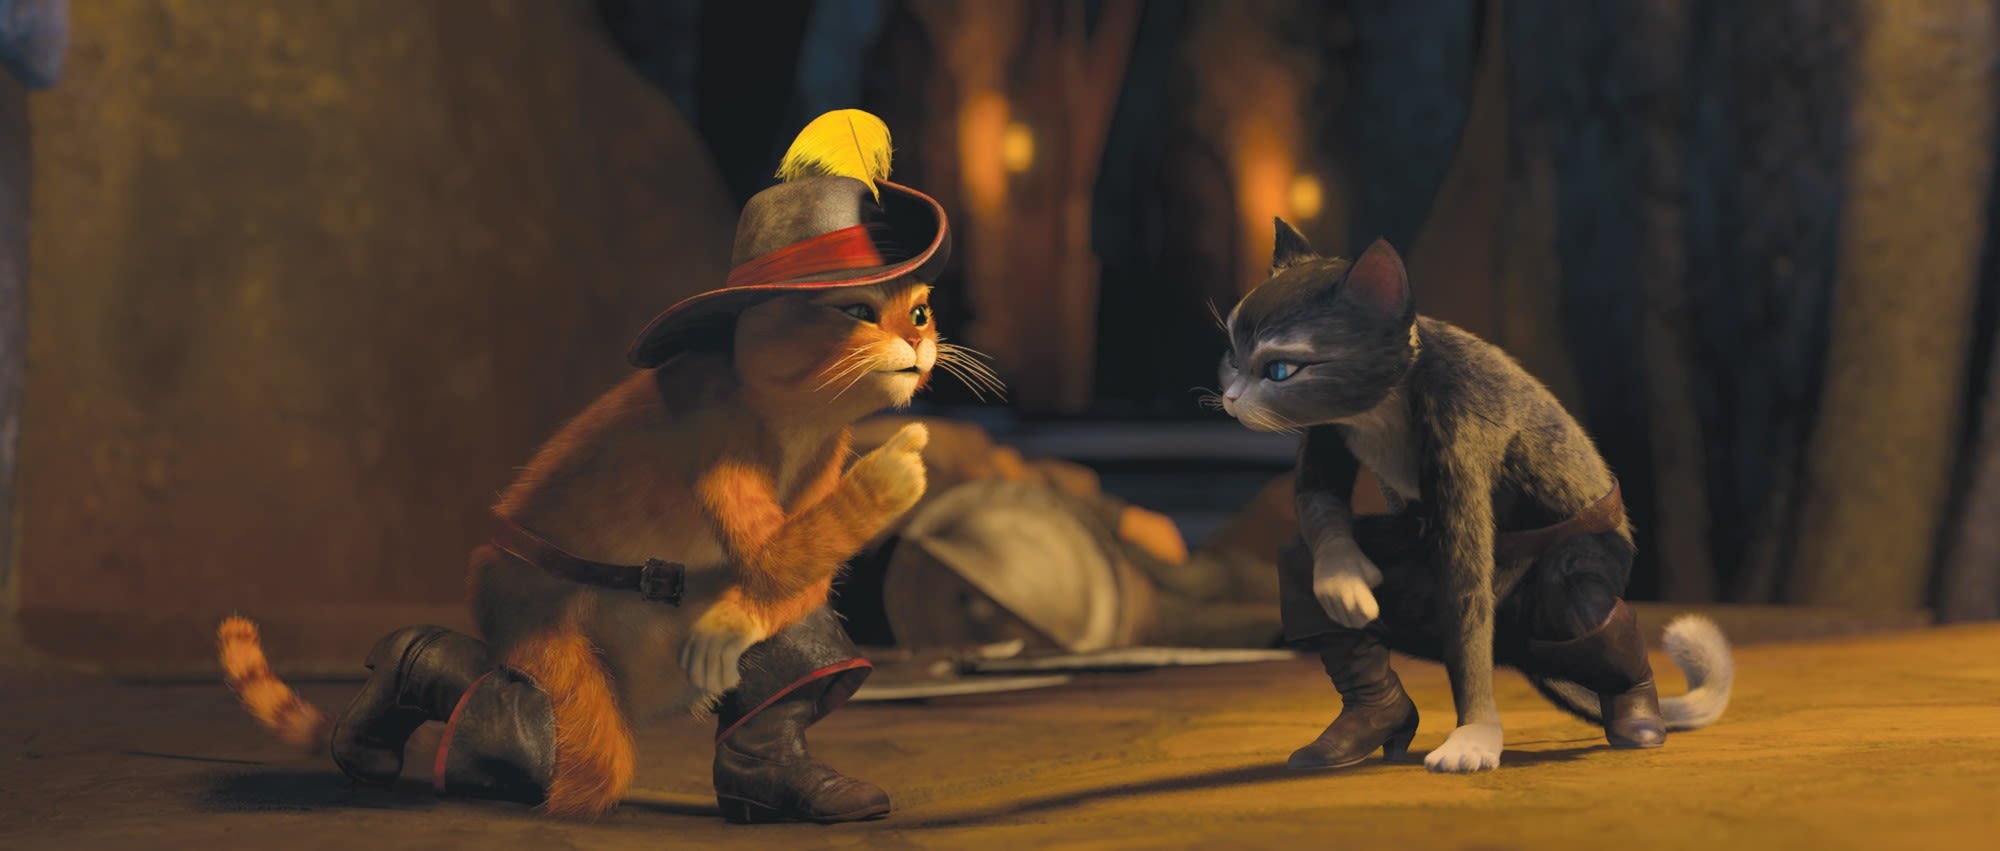 Box office report: 'Puss in Boots' has $34 million debut | CNN